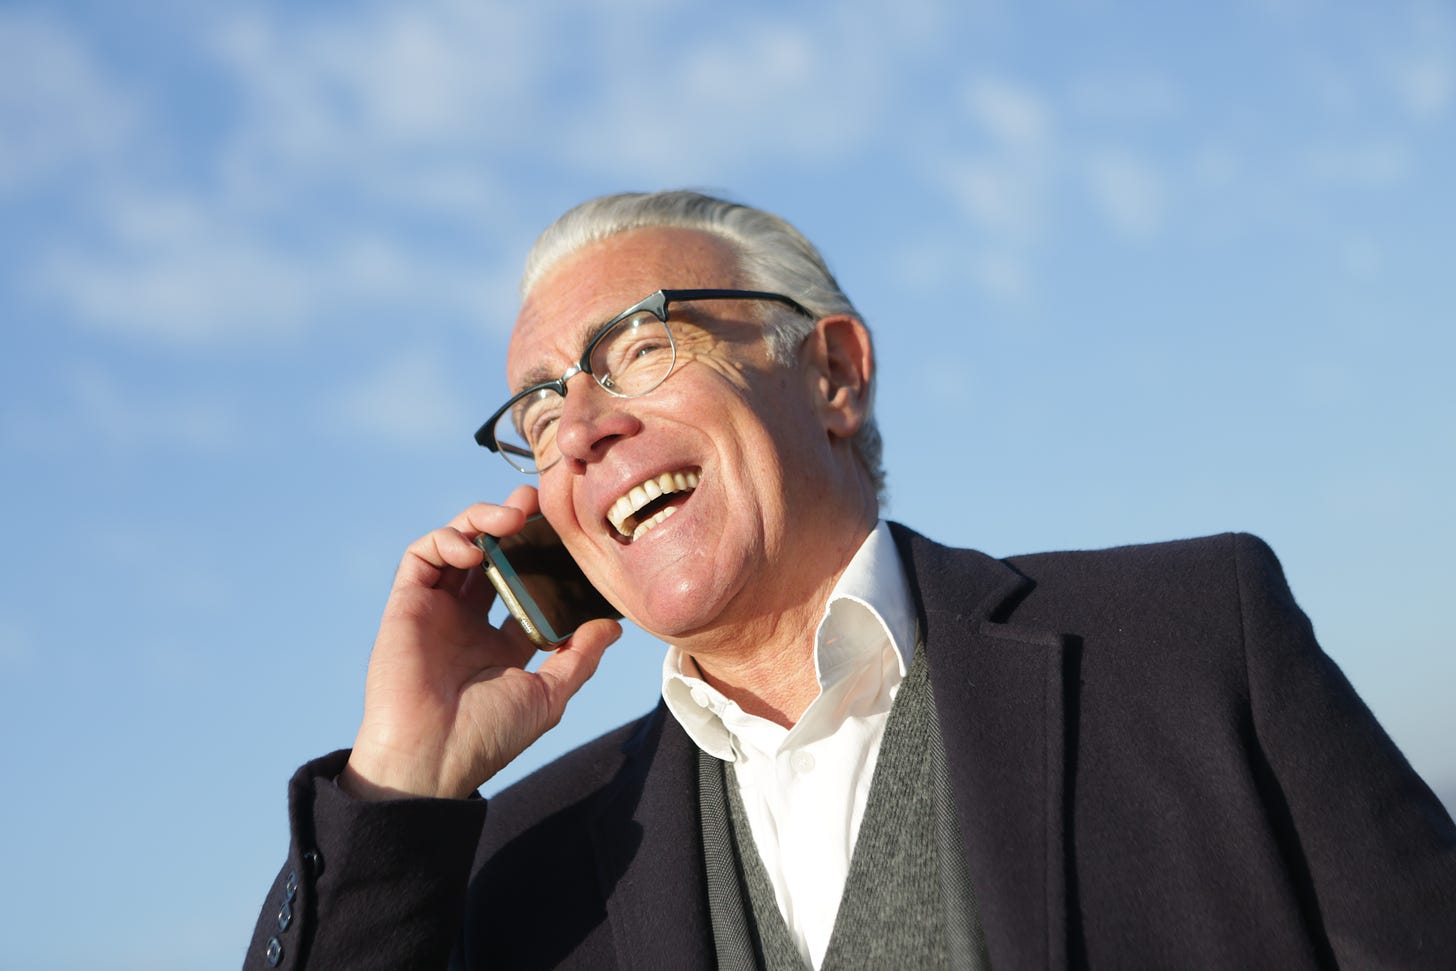 A smiling older man talking on his cell phone.